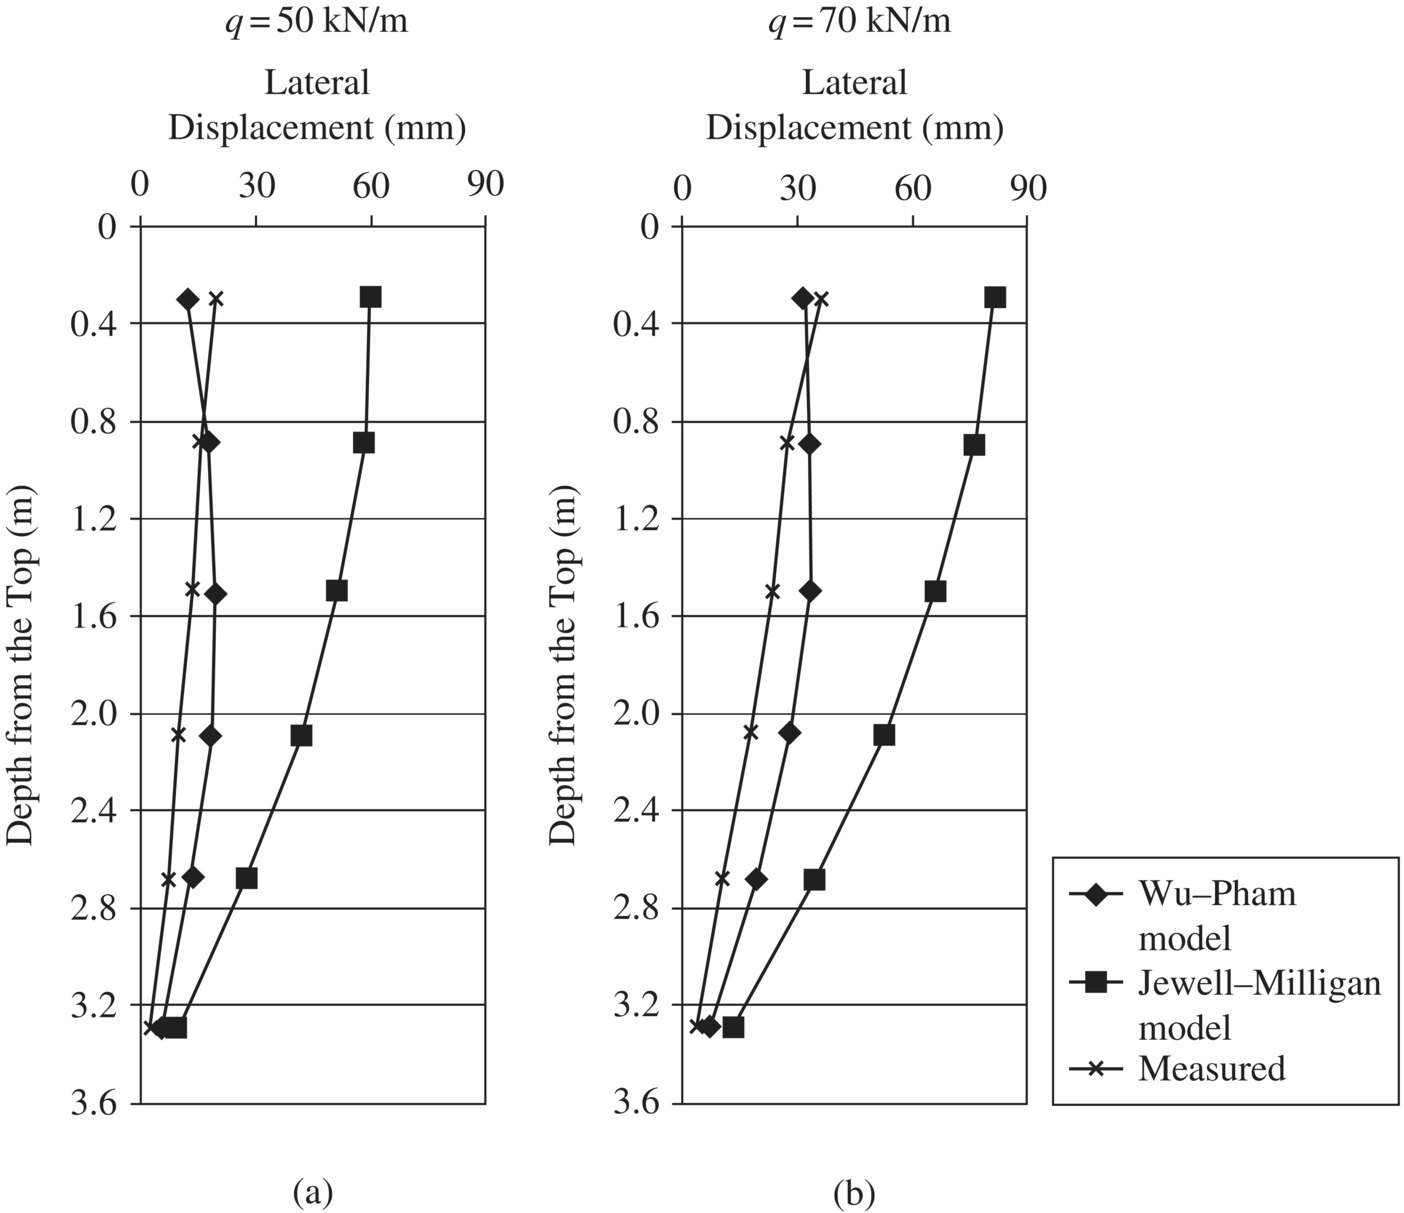 Graphs of depth from the top vs. lateral displacement with two surcharge pressures of q = 50 kN/m (left) and q = 70 kN/m (right), displaying ascending curves with discrete markers for measured, Wu–Pham model, etc.